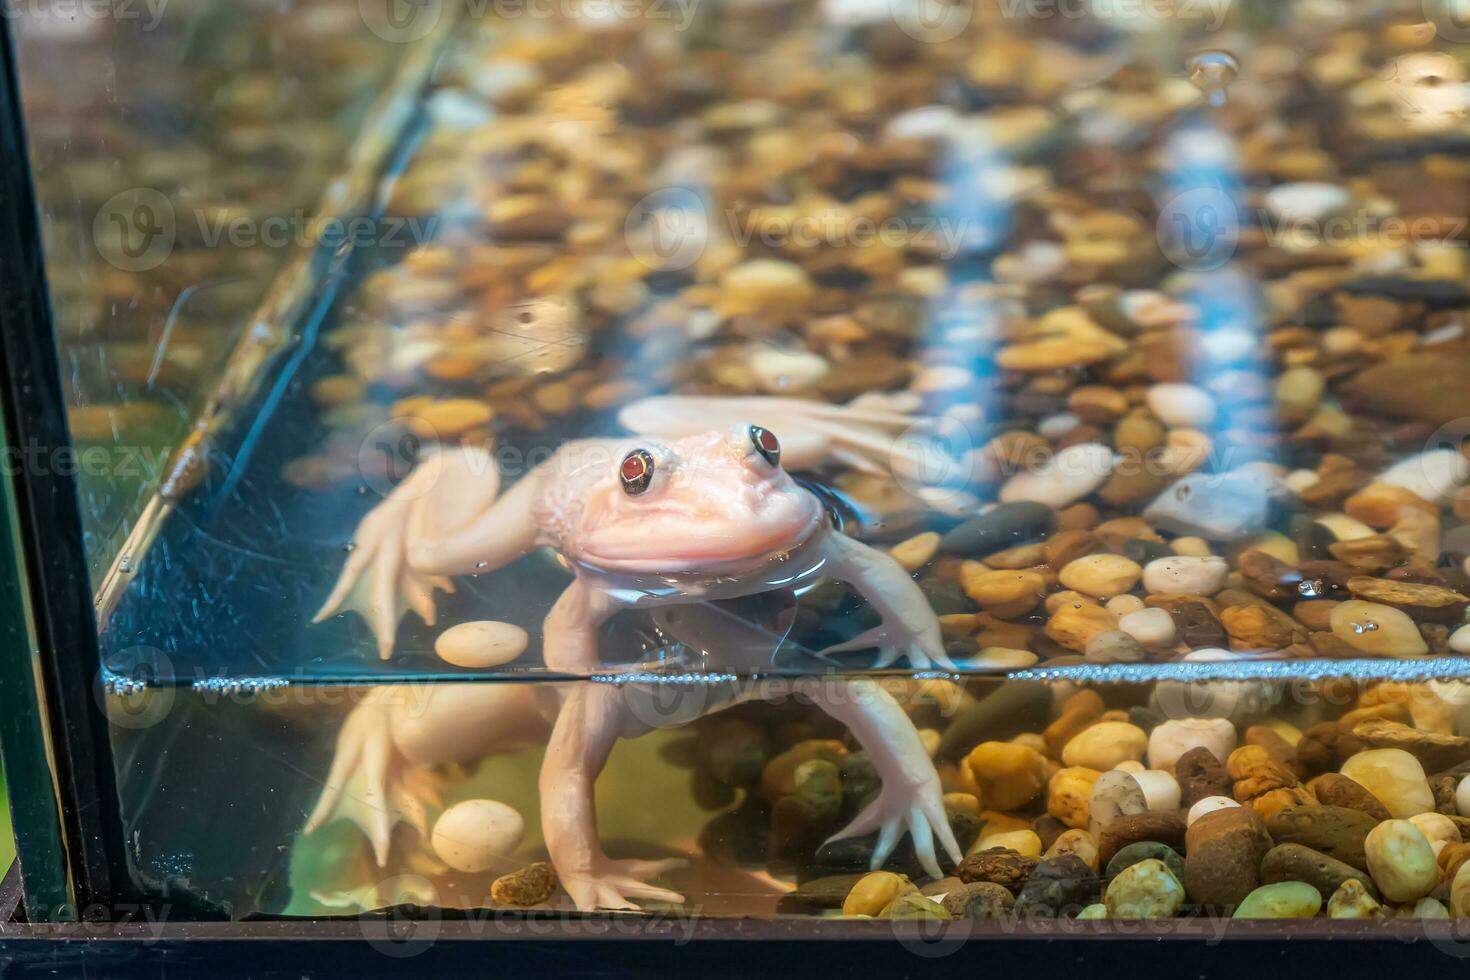 Albino frog in the water photo